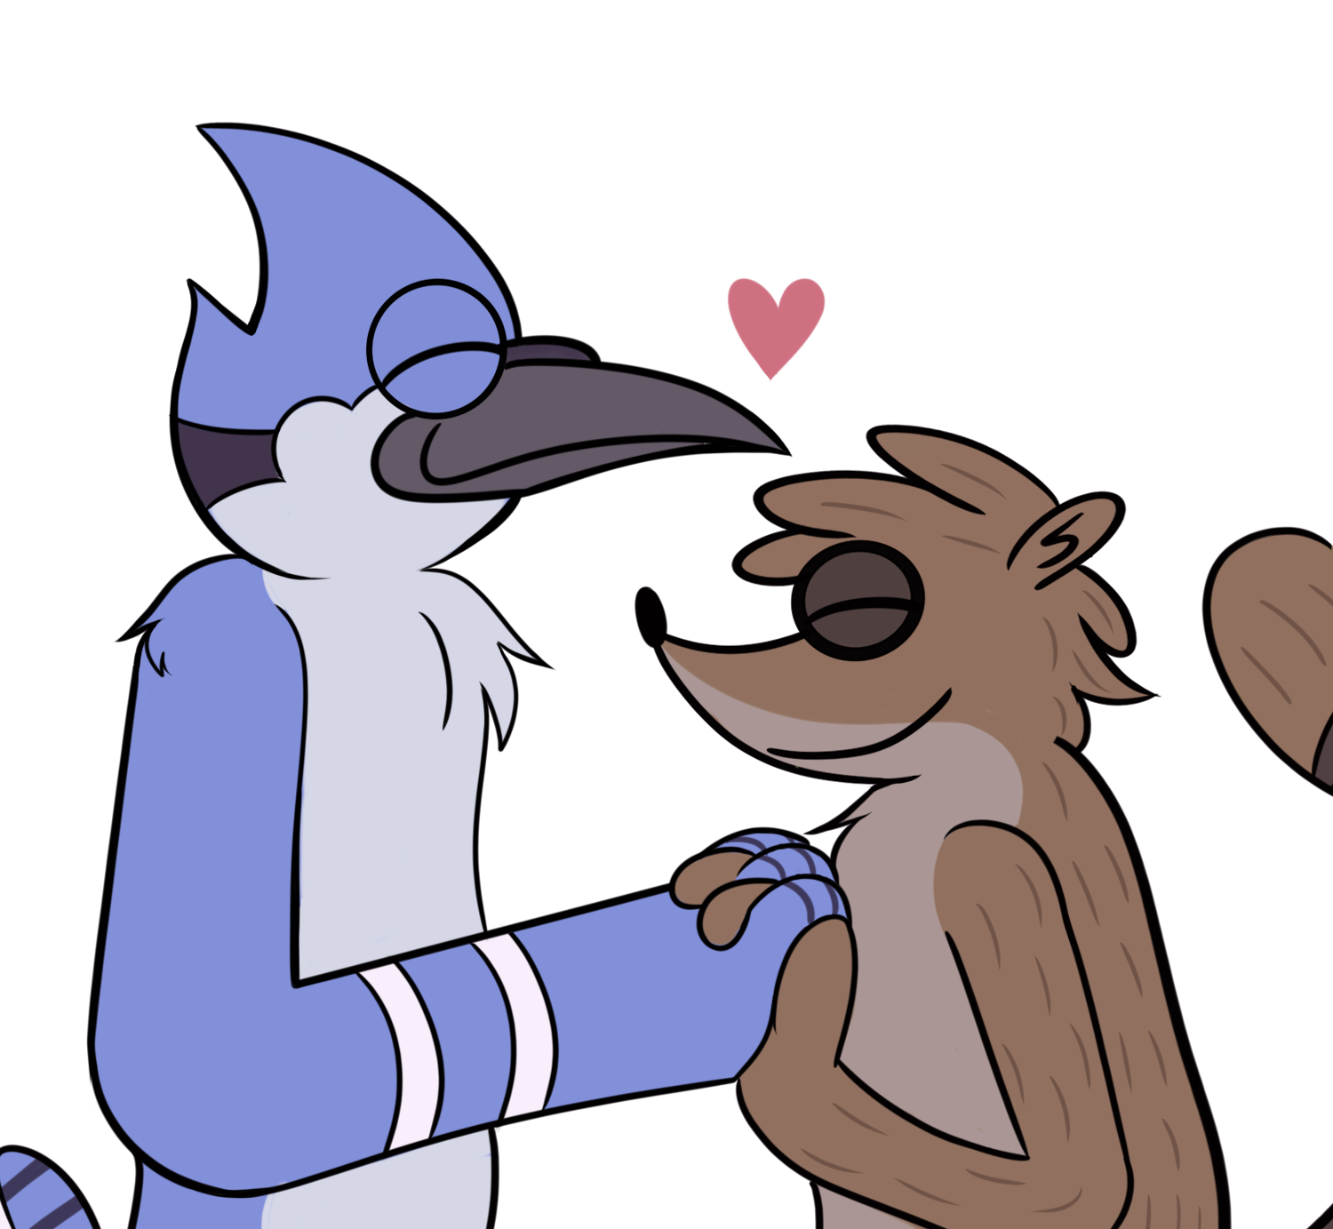 Picture of mordecai and rigby from regular show holding hands.